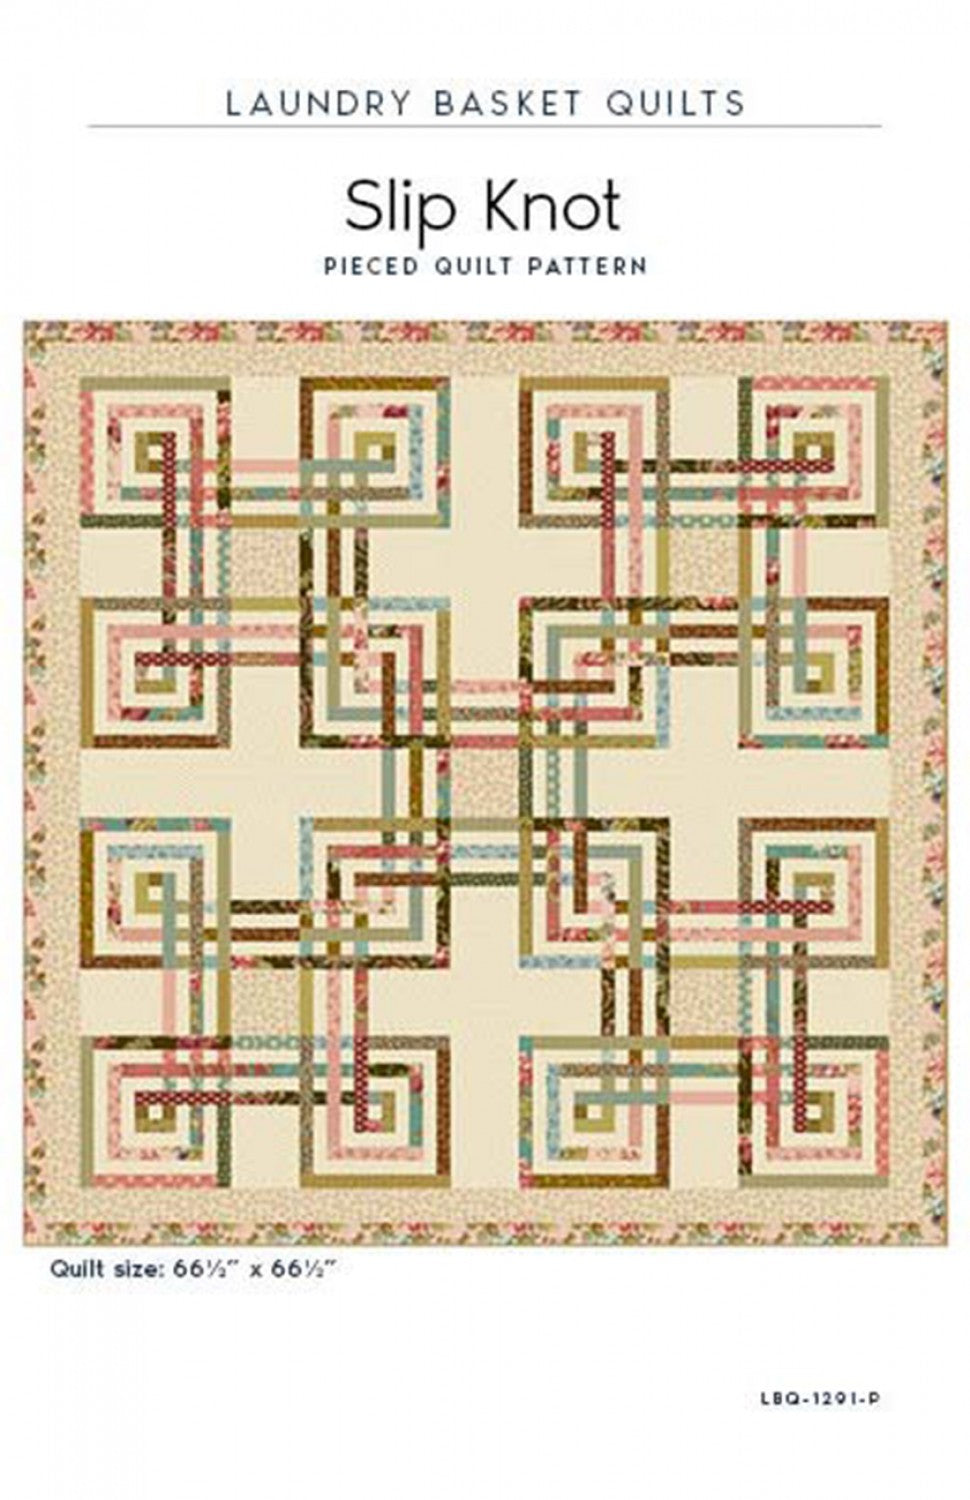 Slip Knot Quilt Pattern by Edyta Sitar of Laundry Basket Quilts